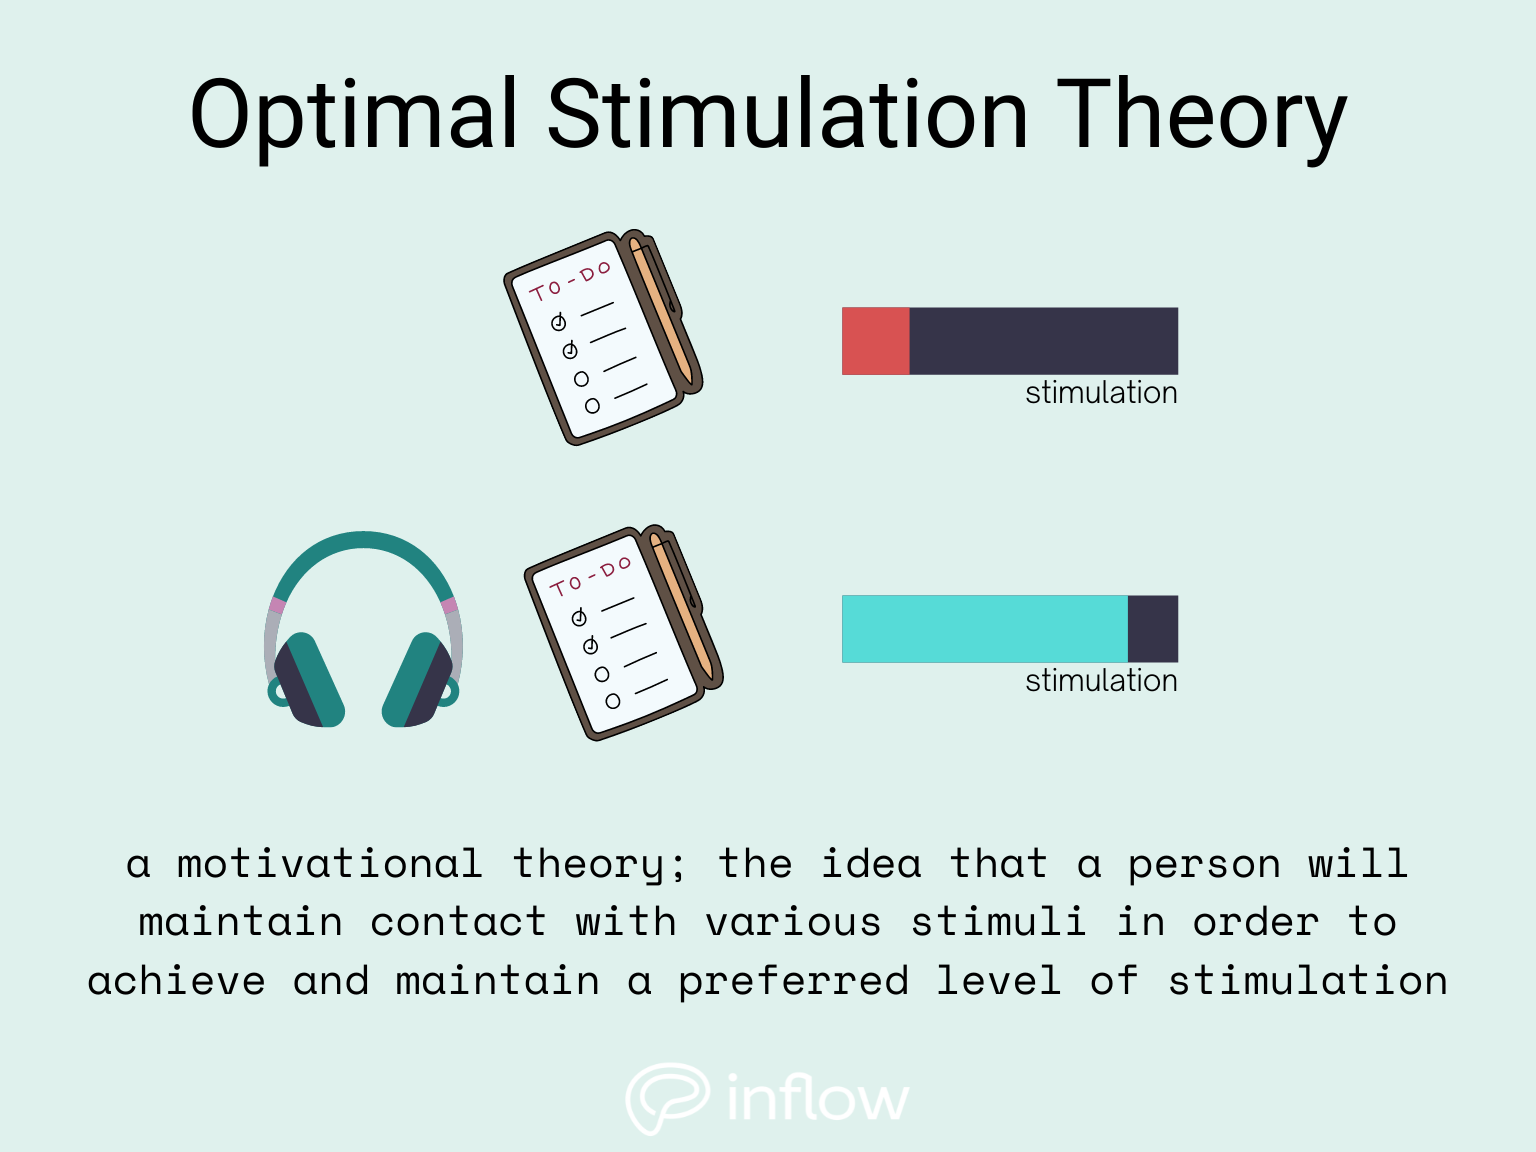 Optimal stimulation theory. definition: A motivational theory that a person will maintain contact with various stimuli in order to achieve and maintain a preferred level of stimulation. graphic: shows a to-do list with low stimulation, shows a to do list with headphones with higher stimulation